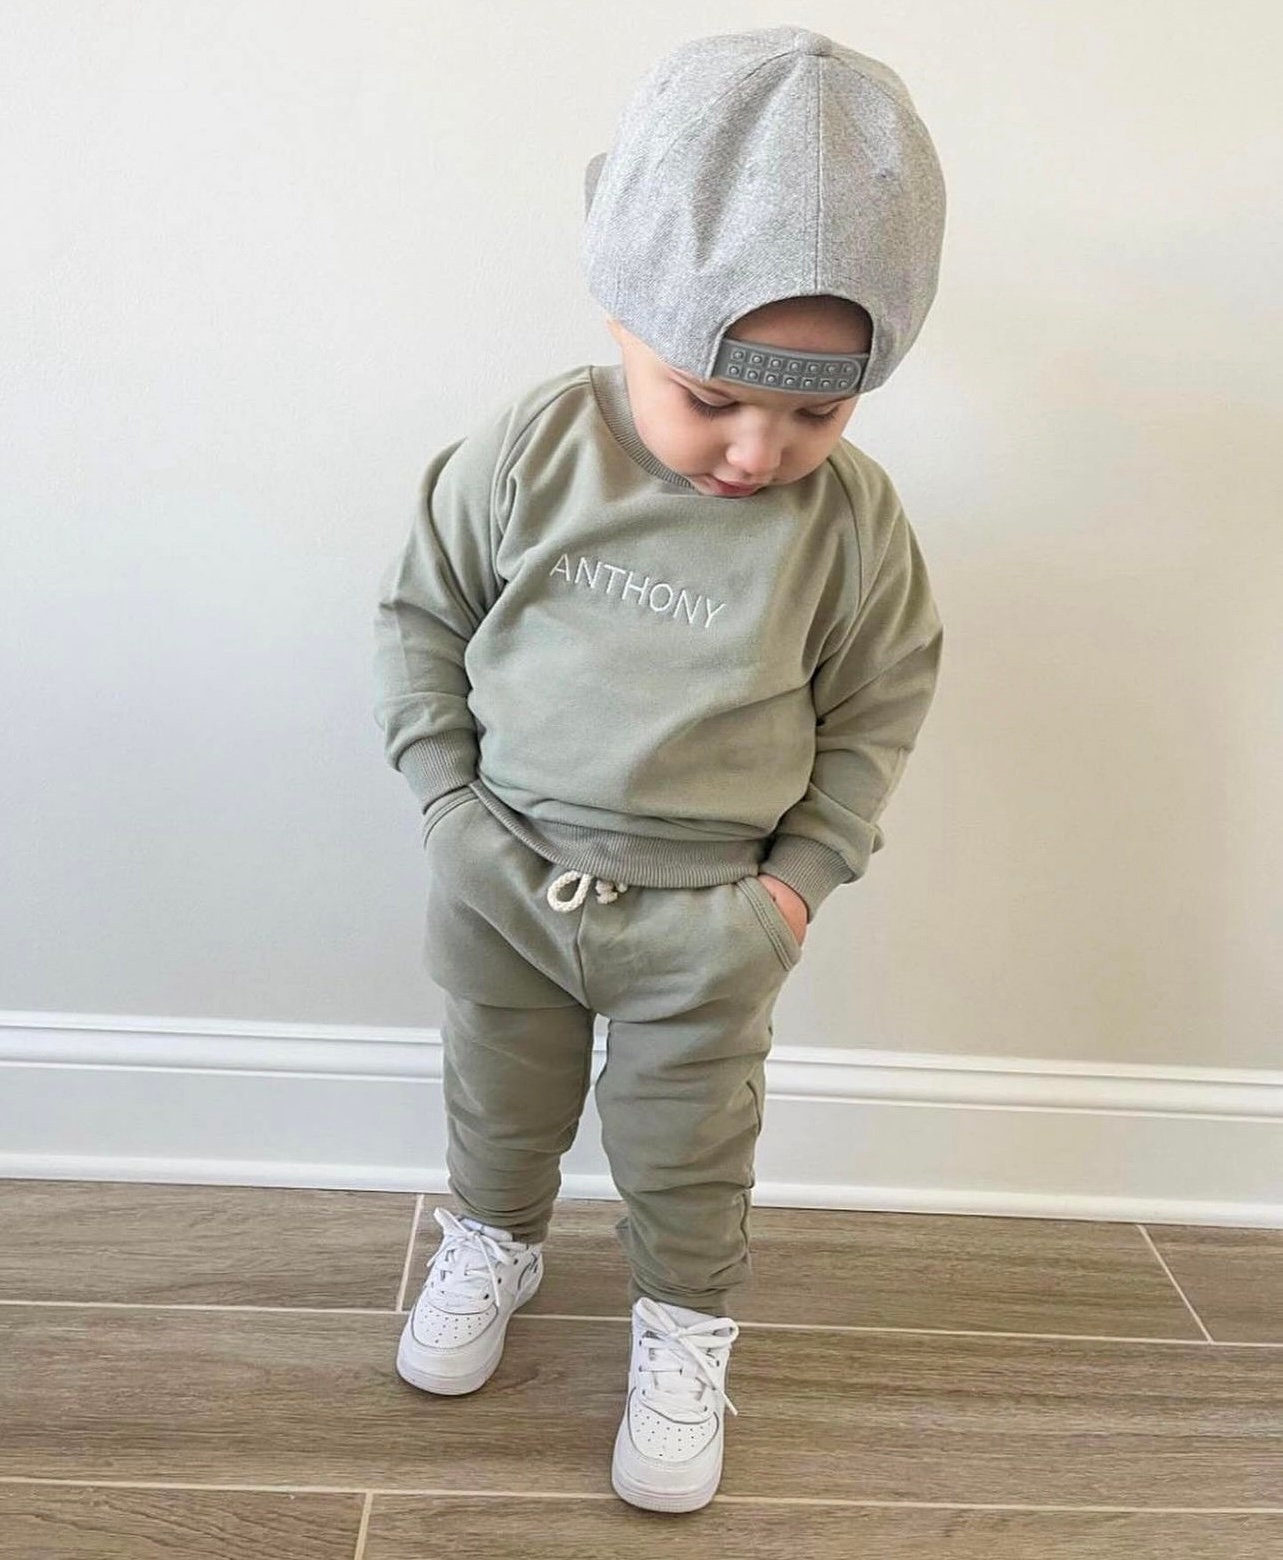 Personalized Baby Jogger Set Toddler Track Suit With Embroidered Name  Gender Neutral Sweatshirt Outfit Baby Shower or Birthday Gift 